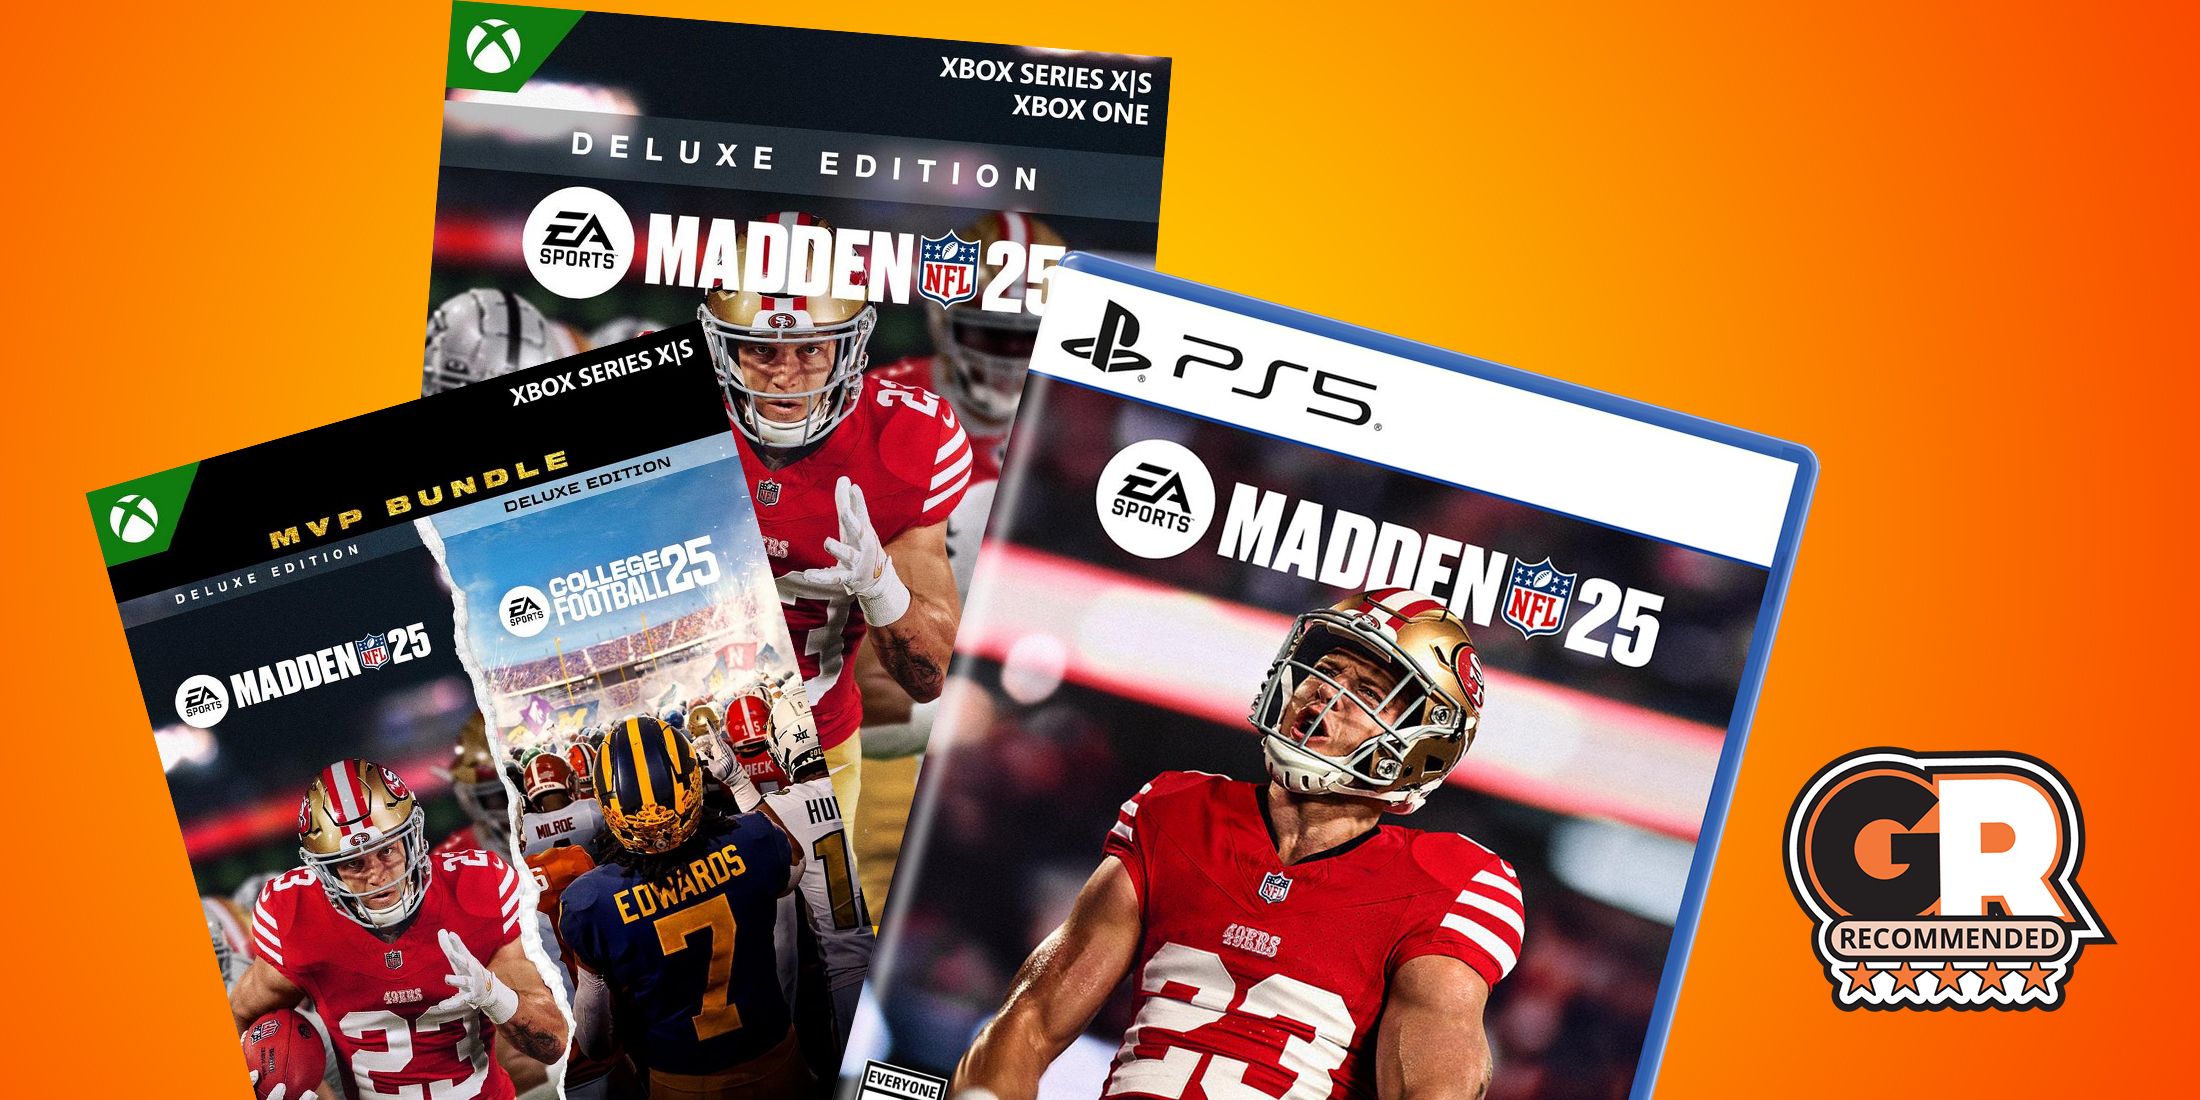 Madden NFL 25: Where And What Edition To Buy?